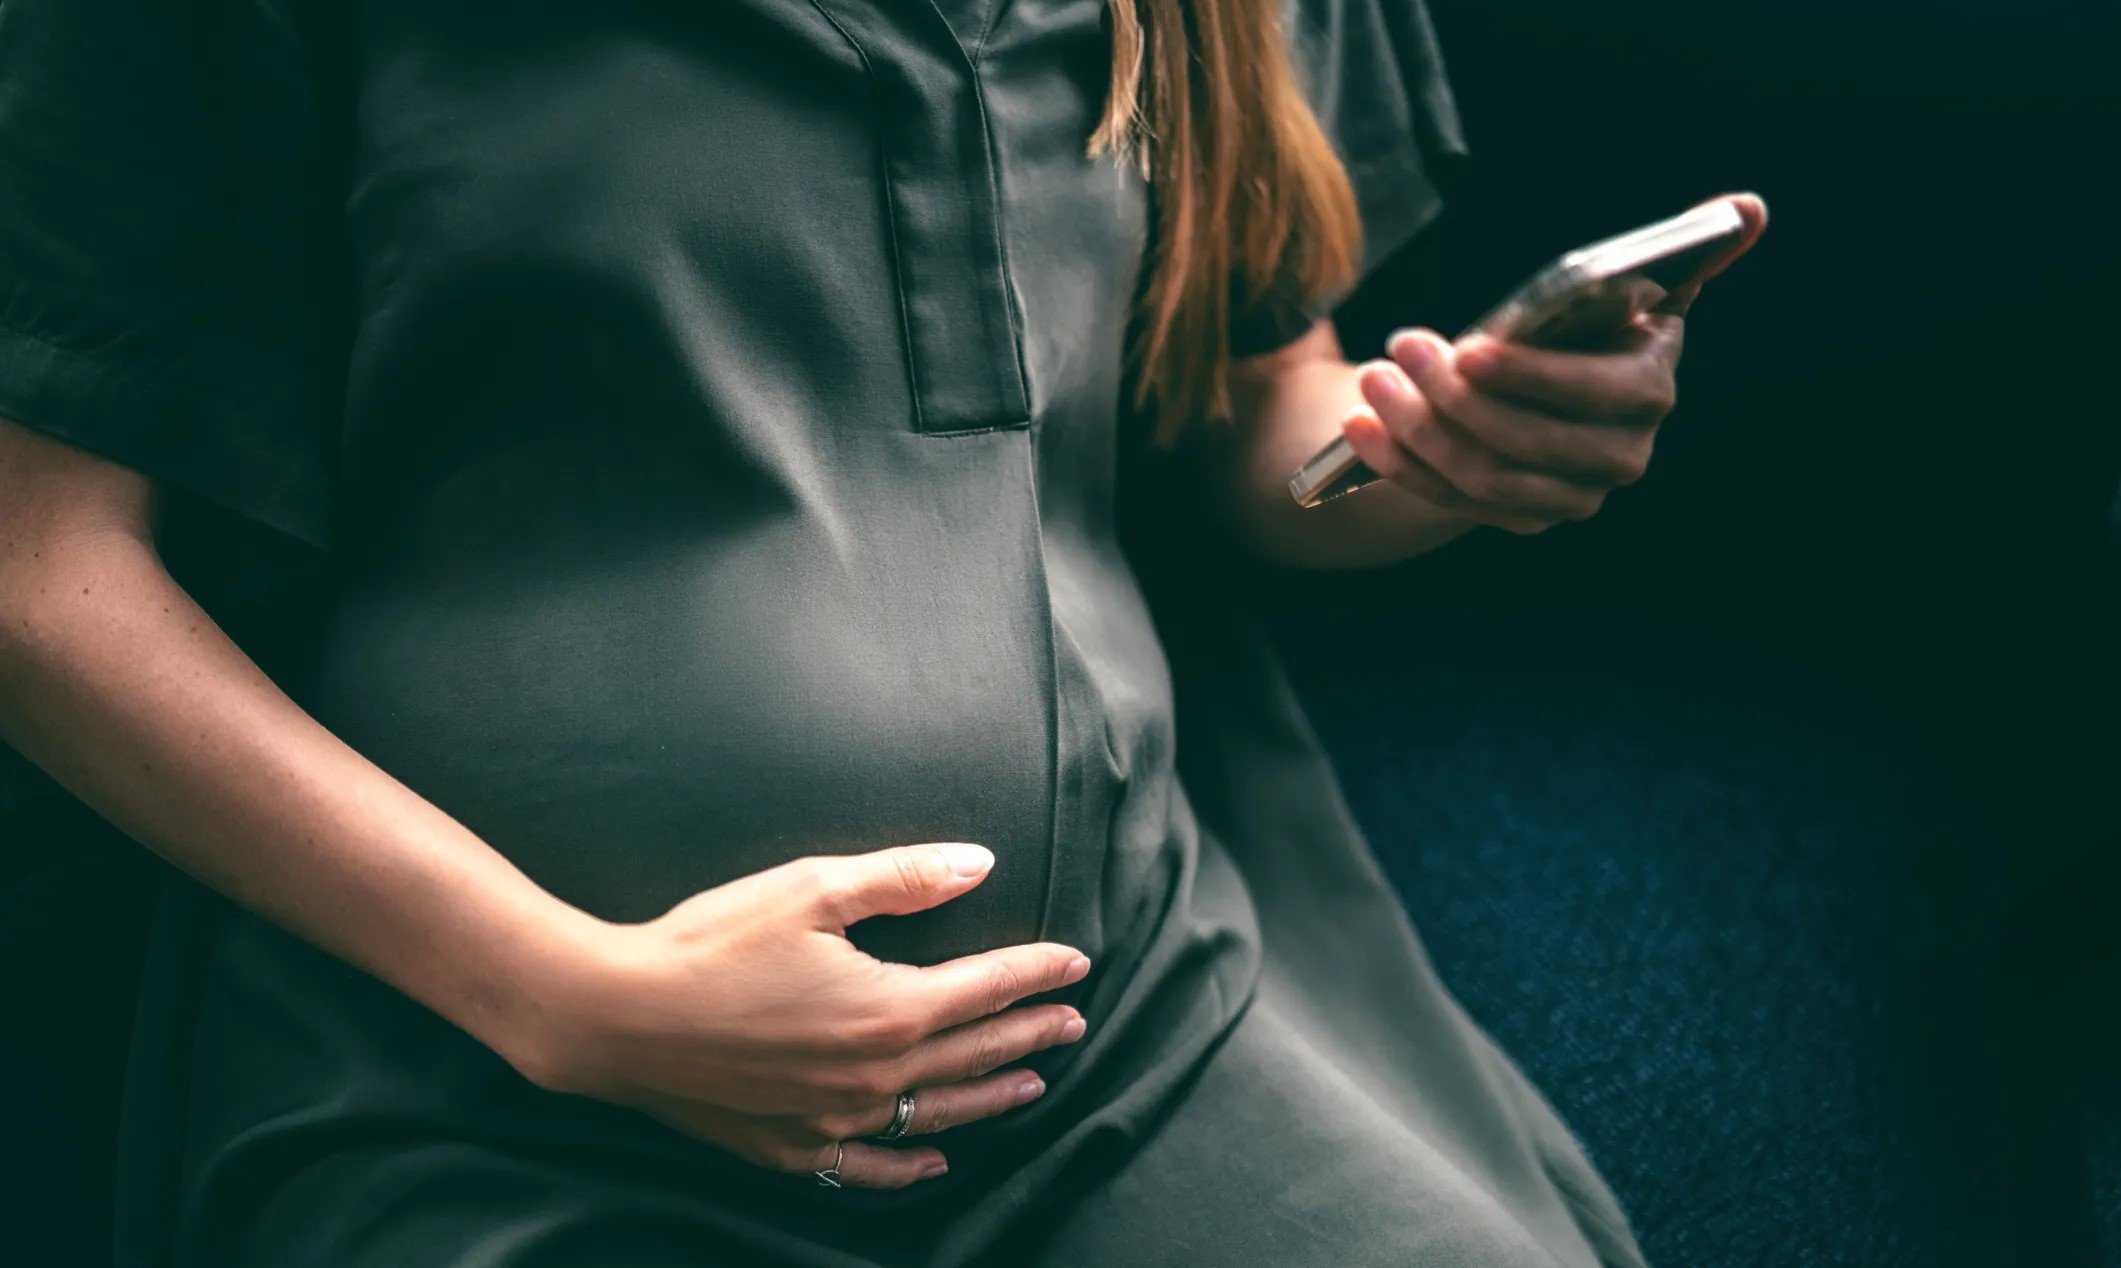 How Online Adoption Ads Prey on Pregnant People